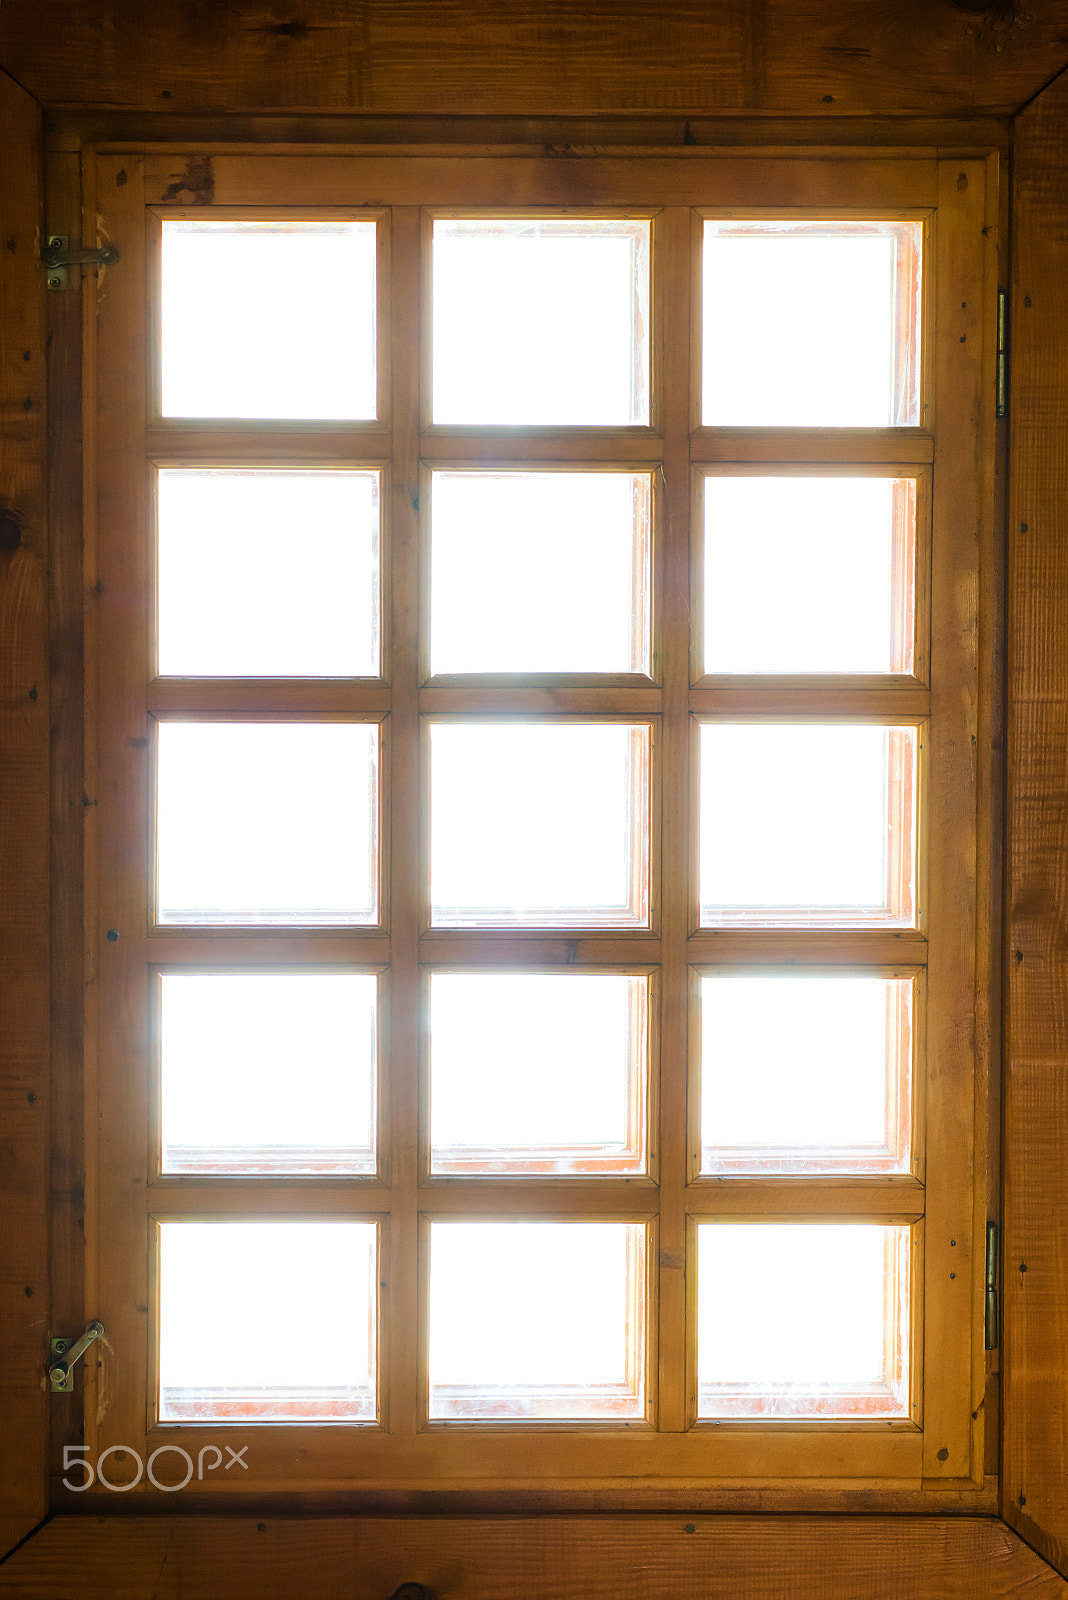 Nikon D800 sample photo. Wooden window with bars photography